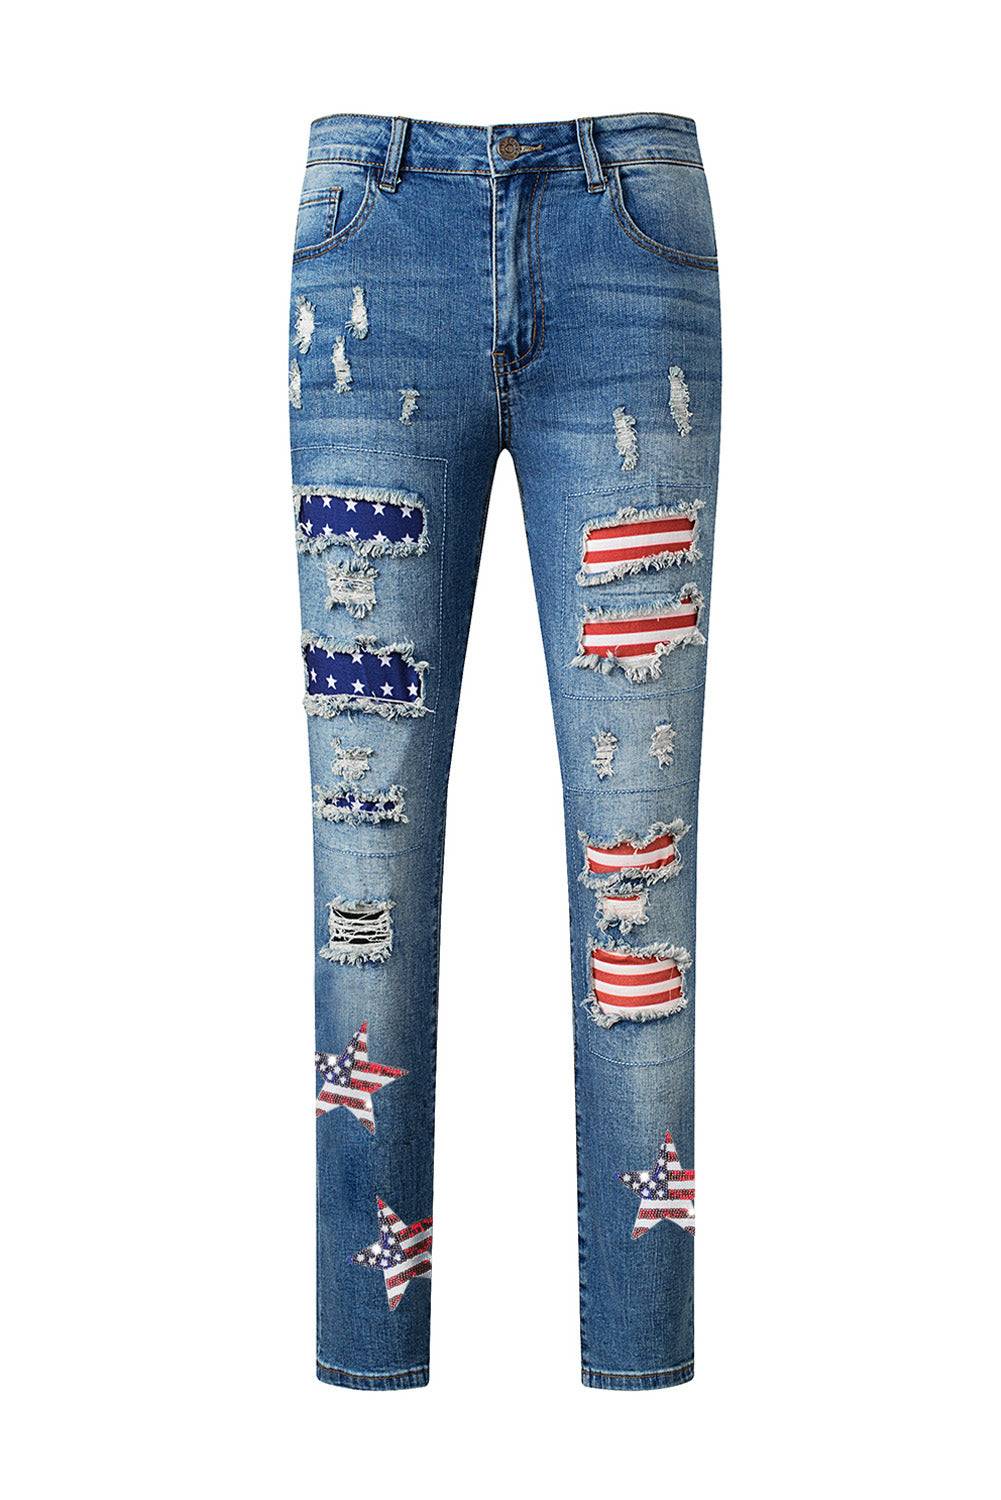 a pair of ripped jeans with american flags on them